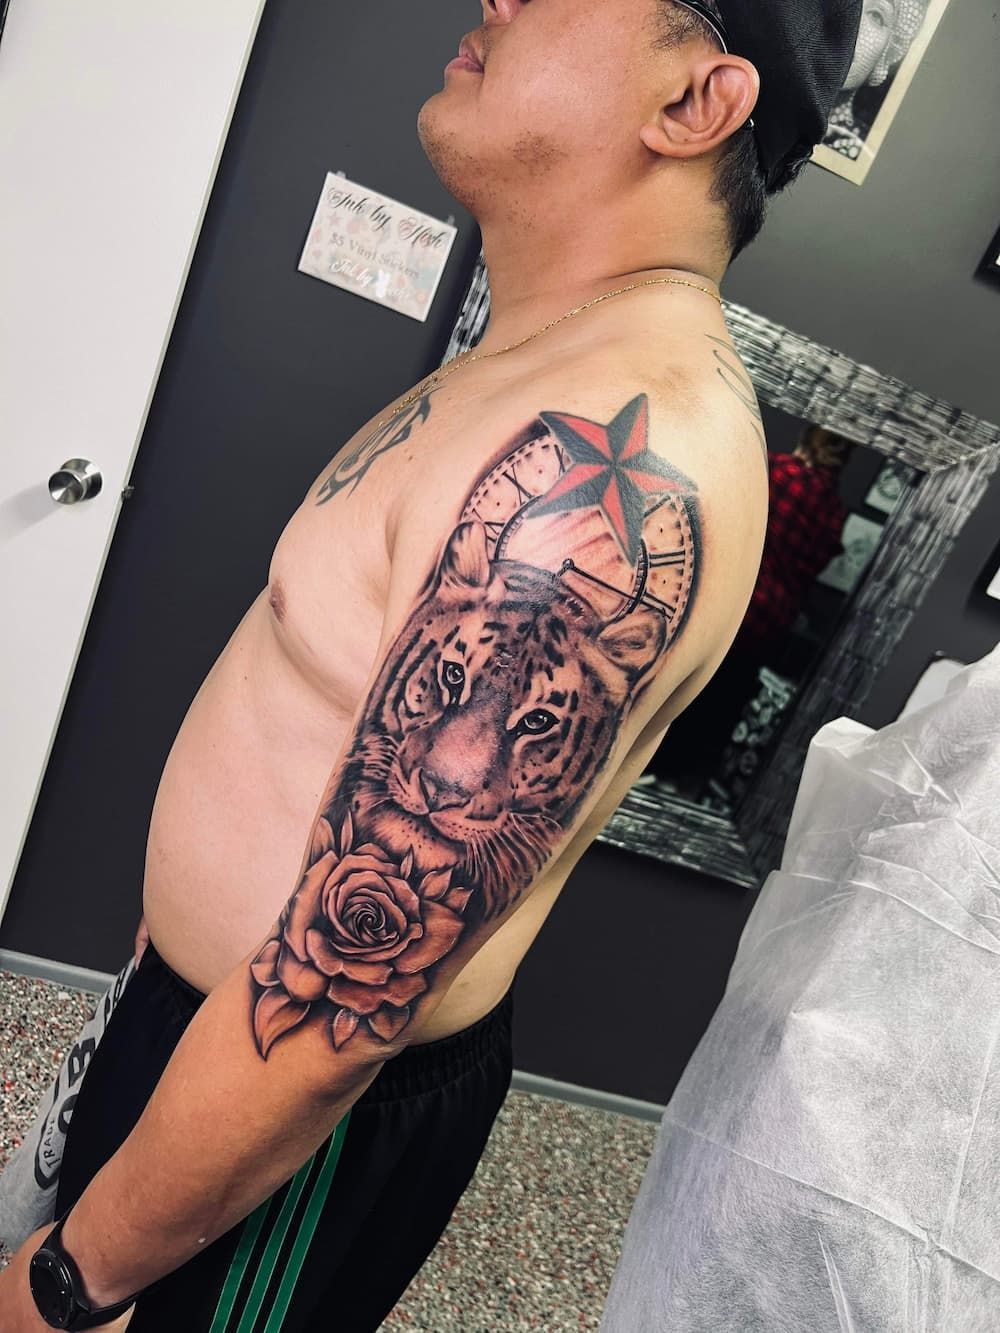 a man has a tattoo of a tiger and roses on his arm - Tattoo Studio in Kawana, QLD